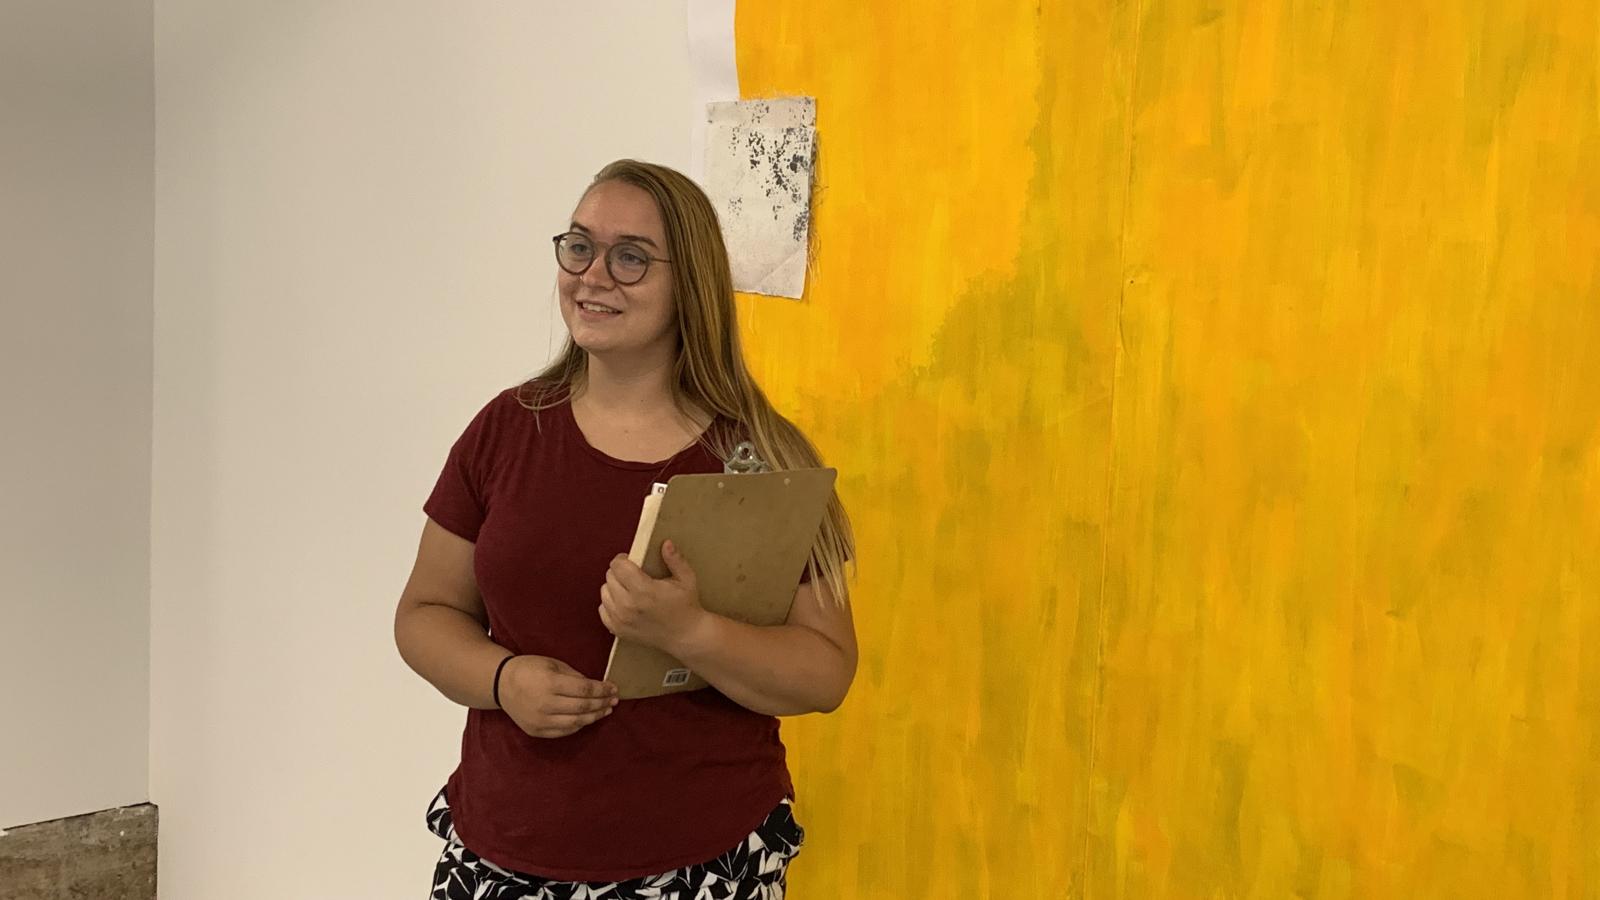 An intern gives an a gallery tour in front of a yellow painting.